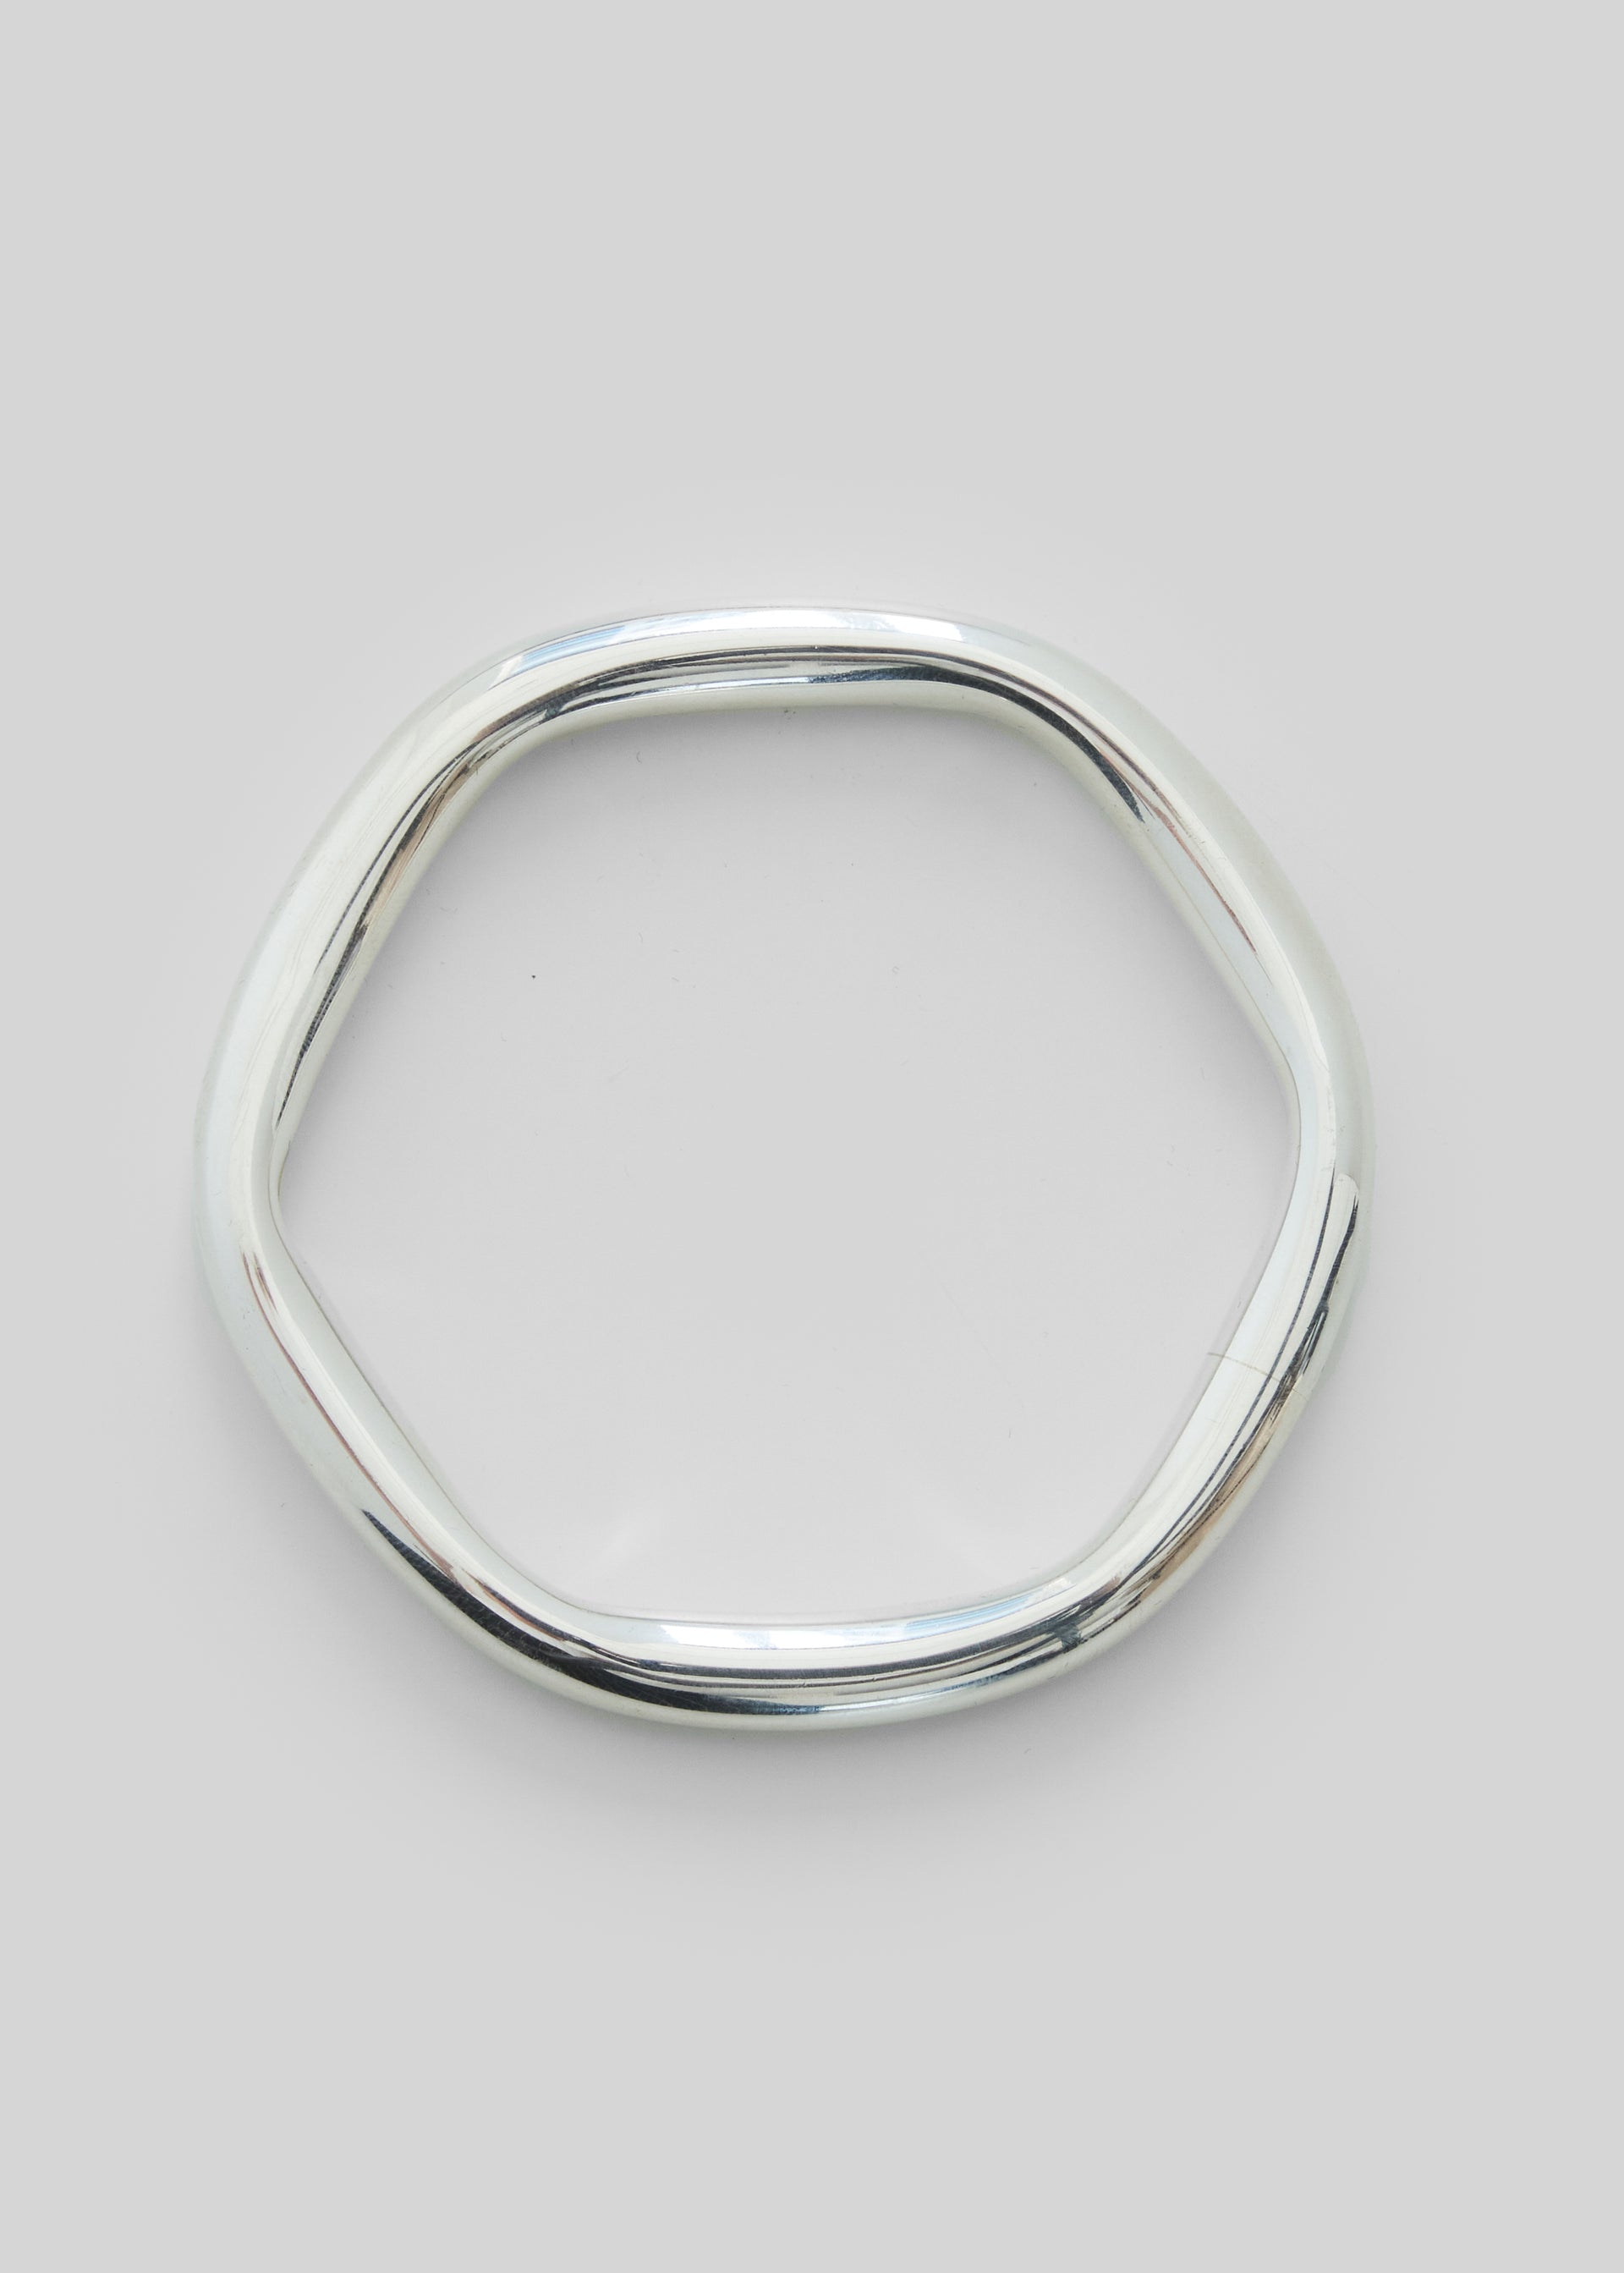 VINTAGE STERLING SILVER BANGLE - COMING SOON